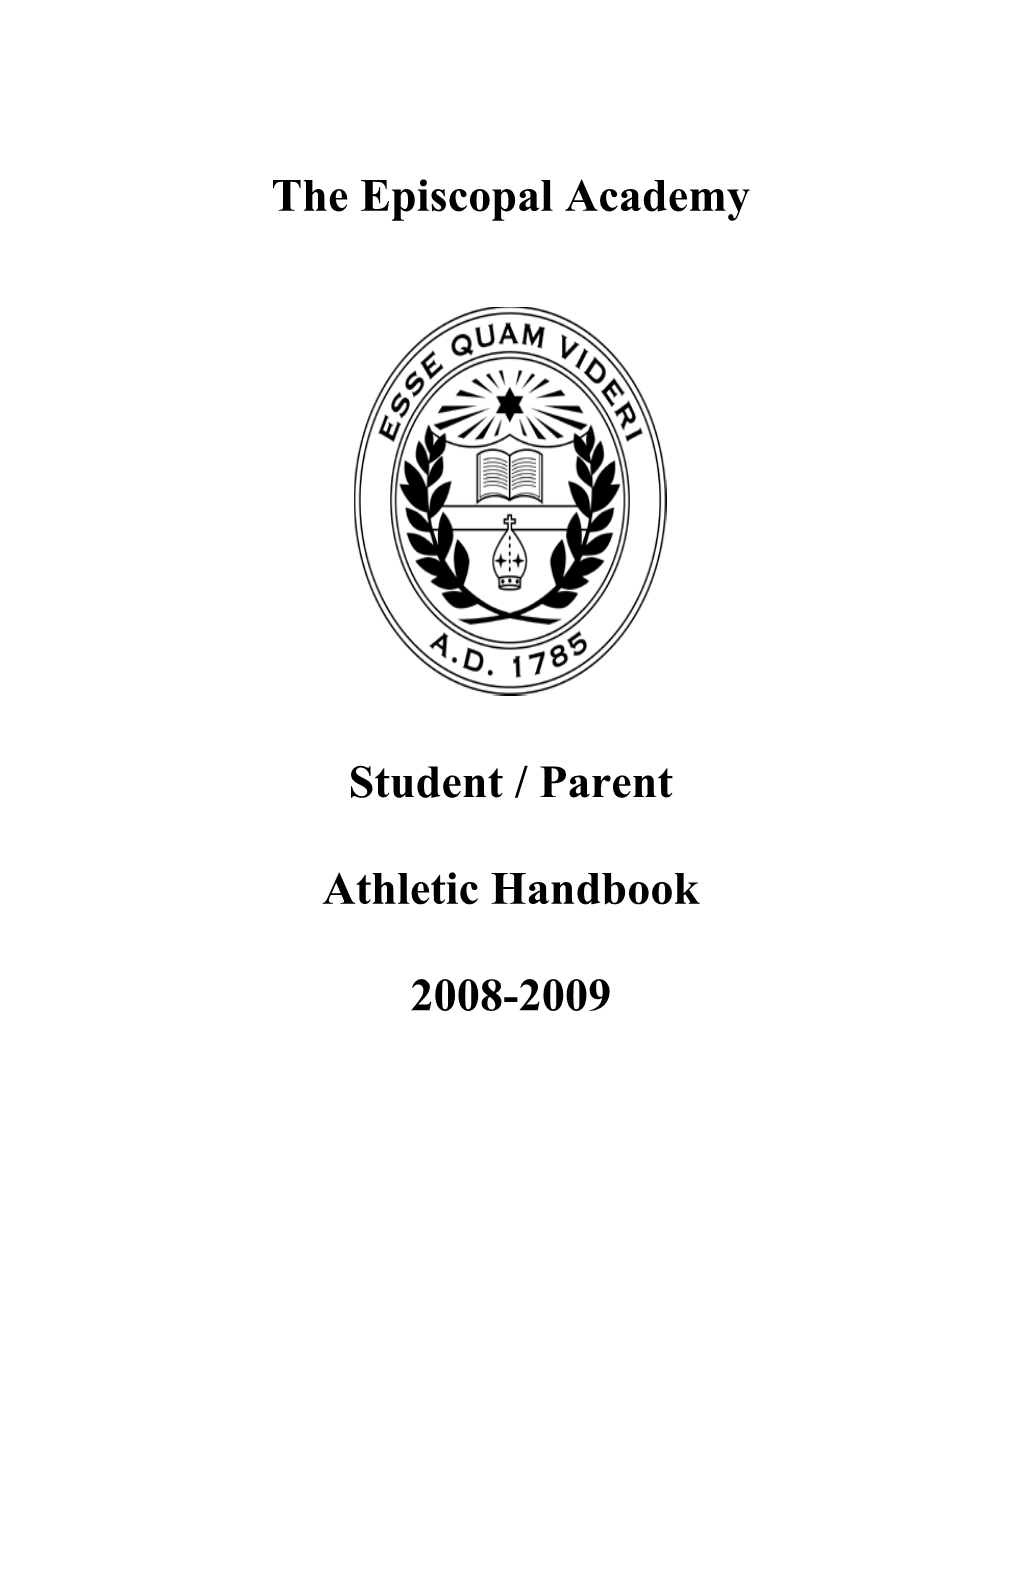 The Purpose of This Guide Is to Provide Student-Athletes and Their Parents/Guardians With